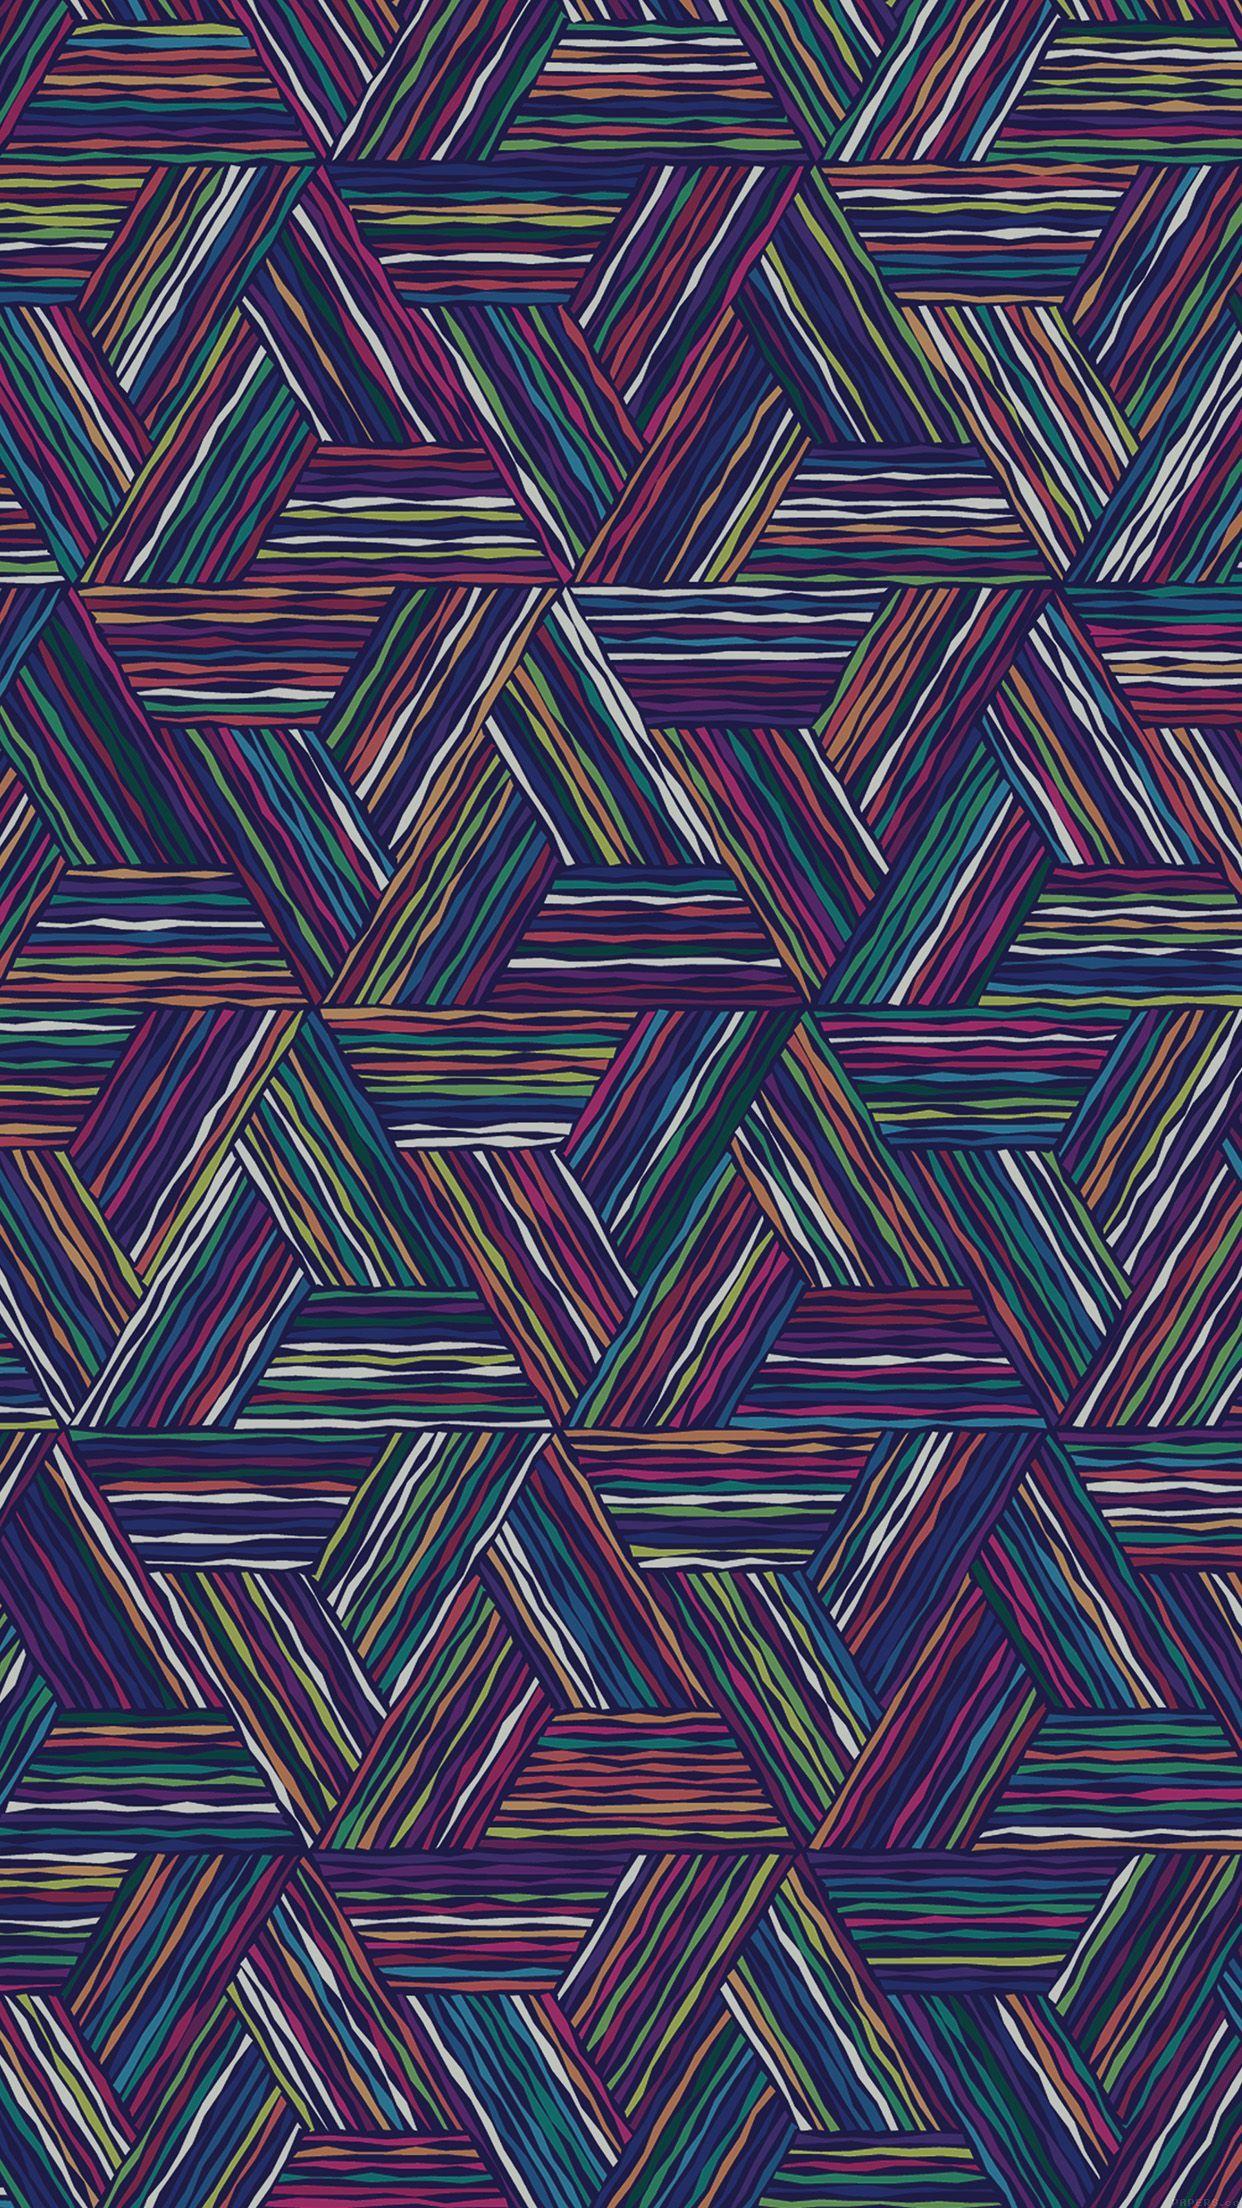 Creative Textures iPhone Wallpaper Free To Download. Pattern